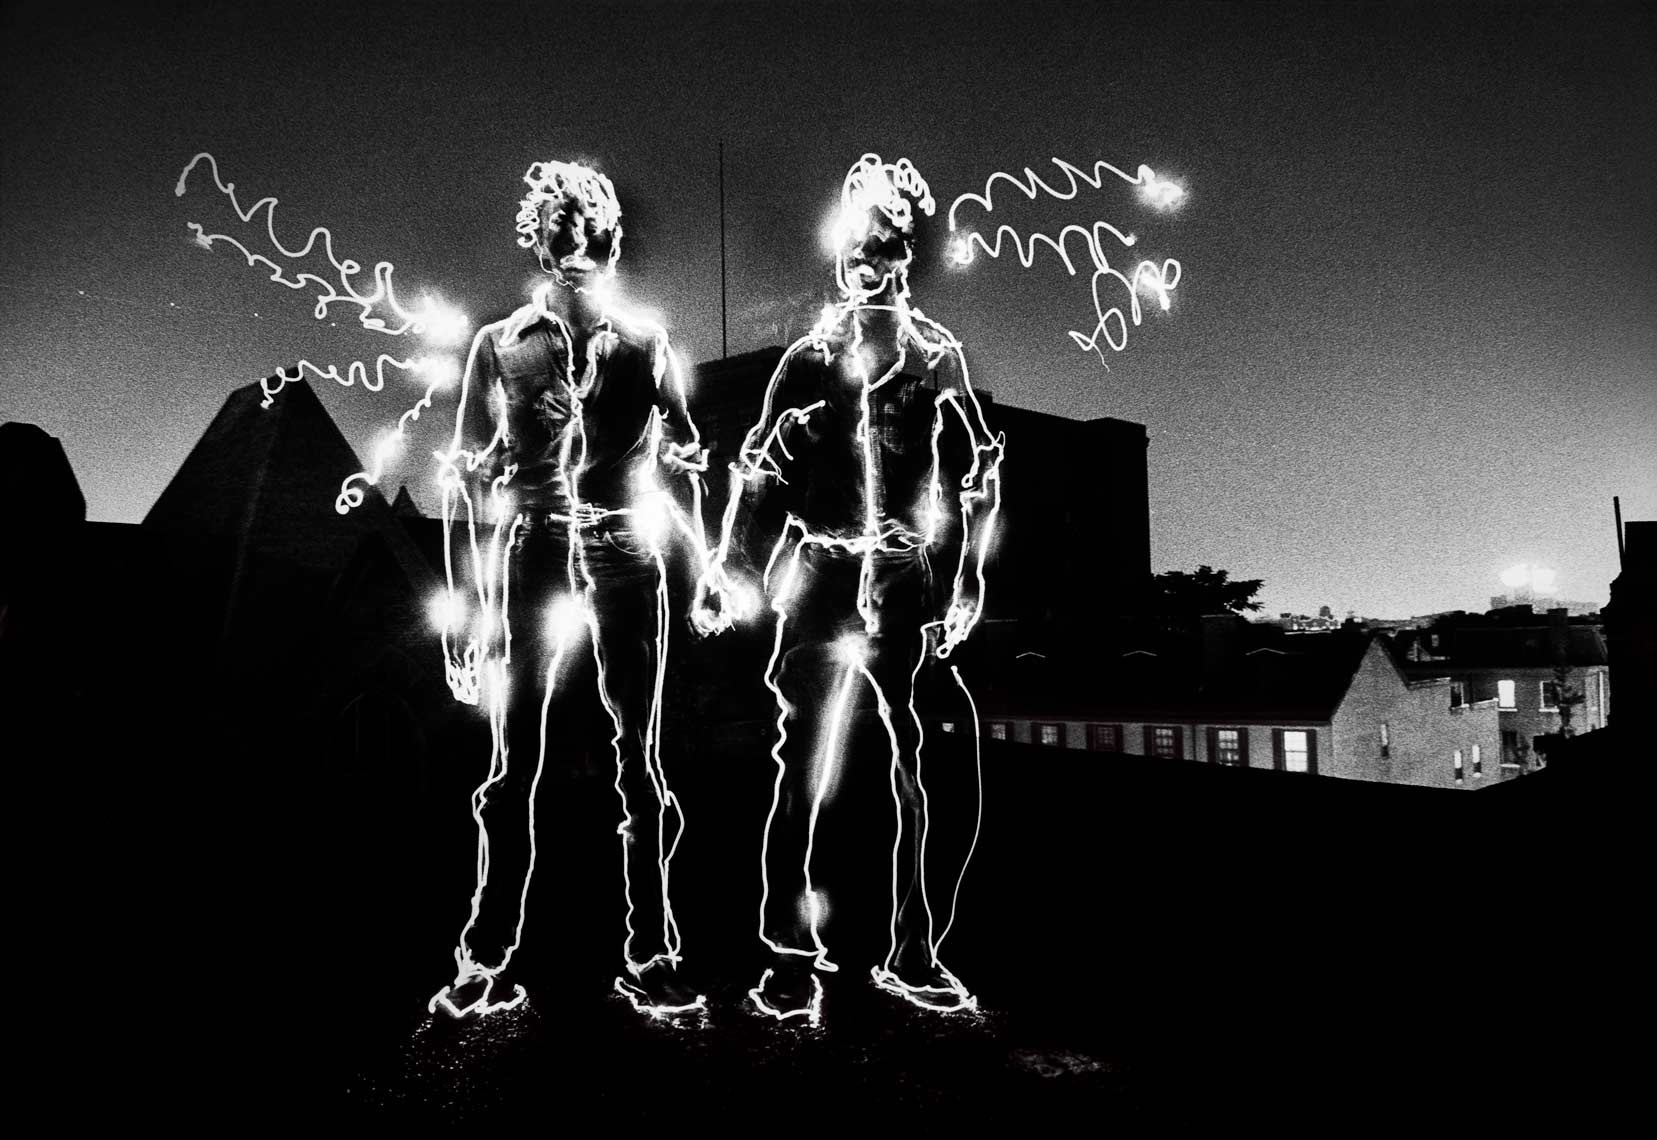 David Lebe; On The Roof With Angelo, 1979-B, light drawing, black and white photograph